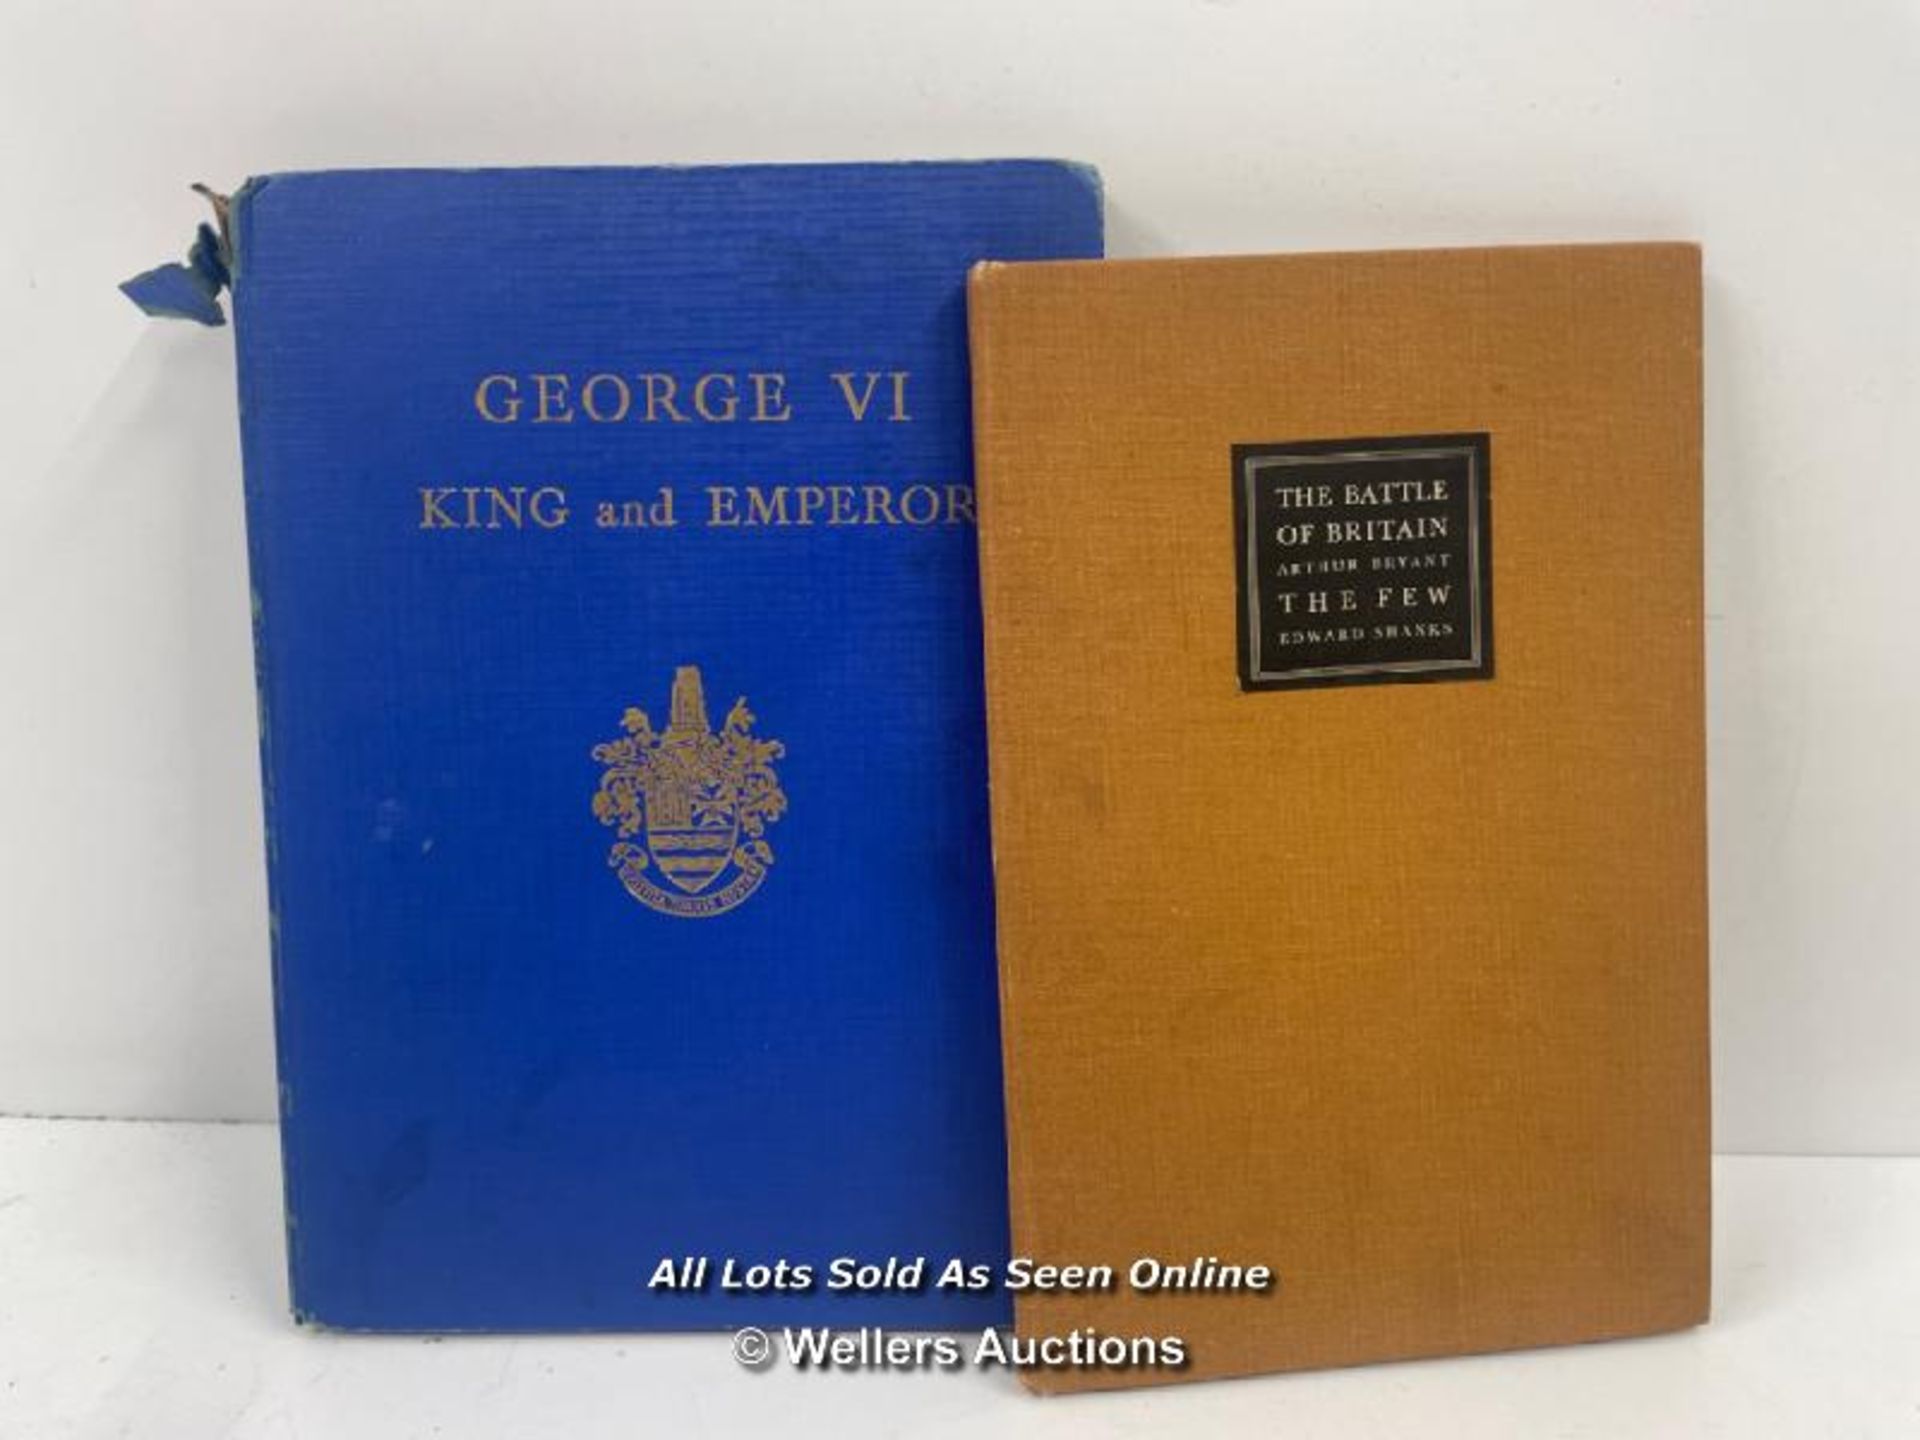 TWO OLD BOOKS; GEORGE VI KING AND EMPEROR 1937 EDITION AND THE BATTLE OF BRITAIN - THE FEW